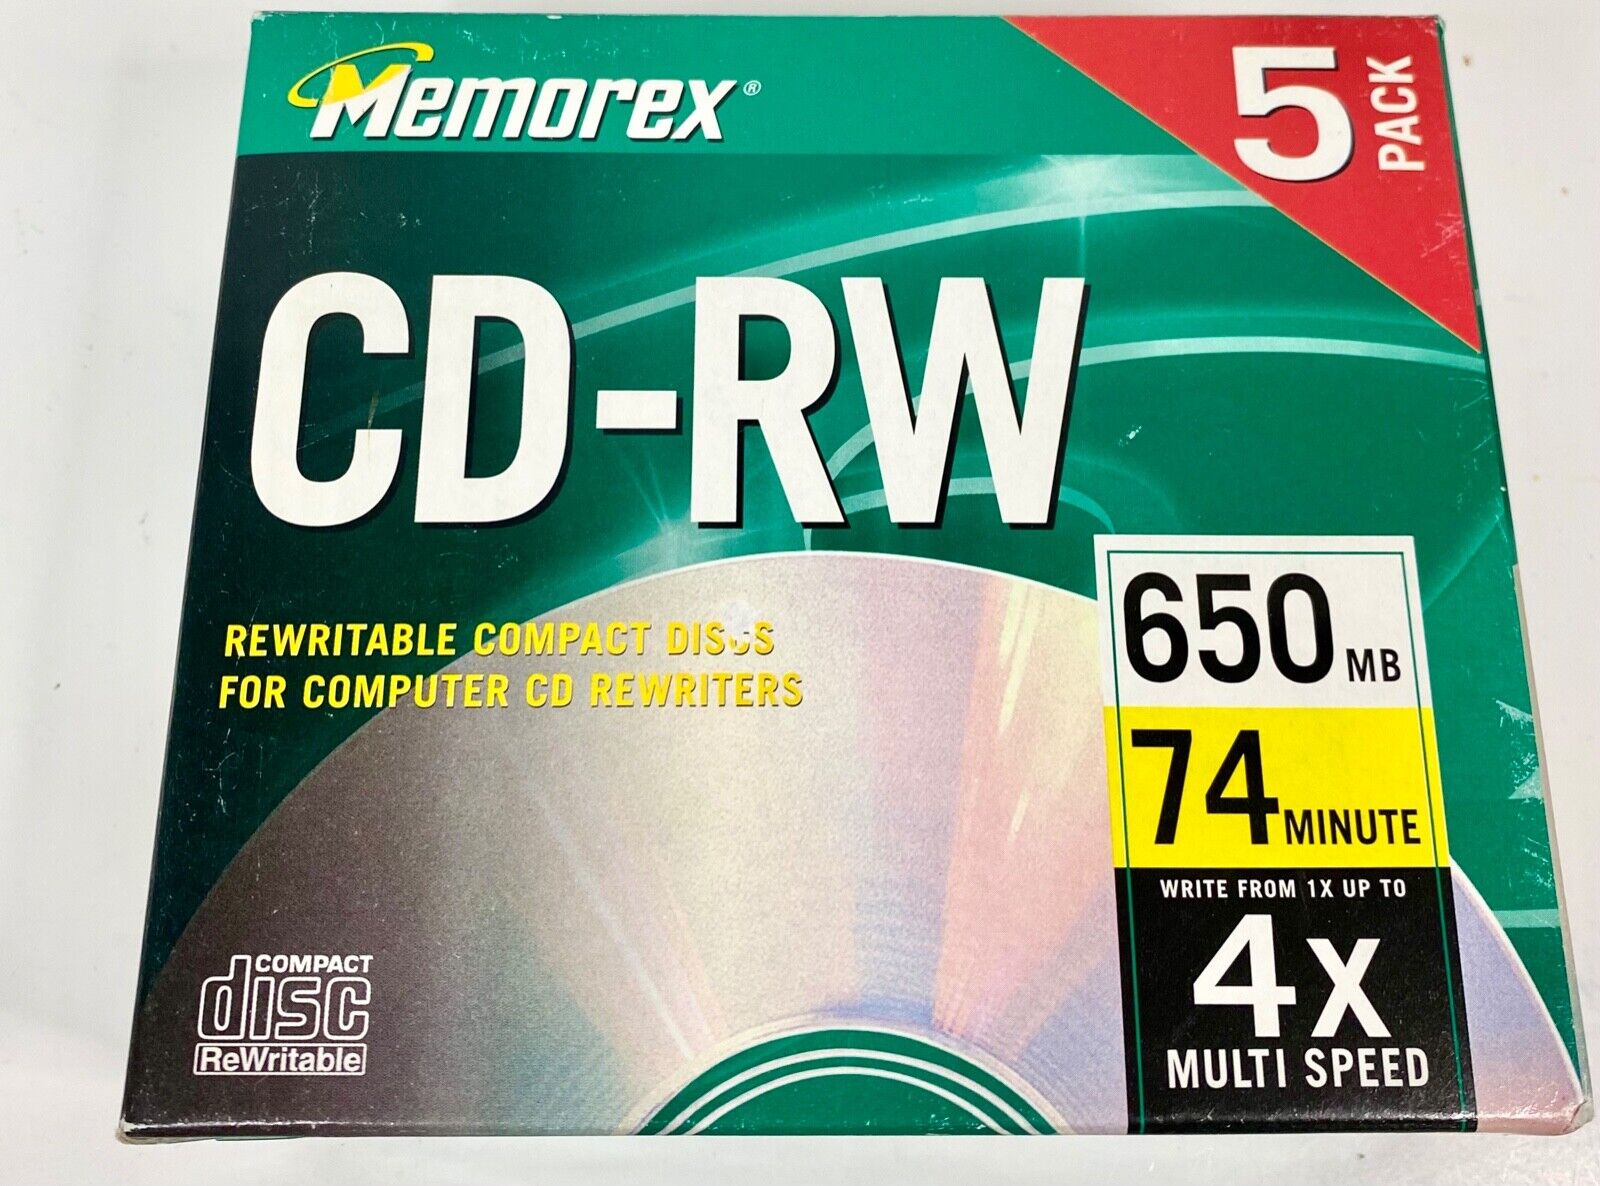 Memorex Cd-rw - 650mb 74 Minute - New - With Cases - 5 Pack